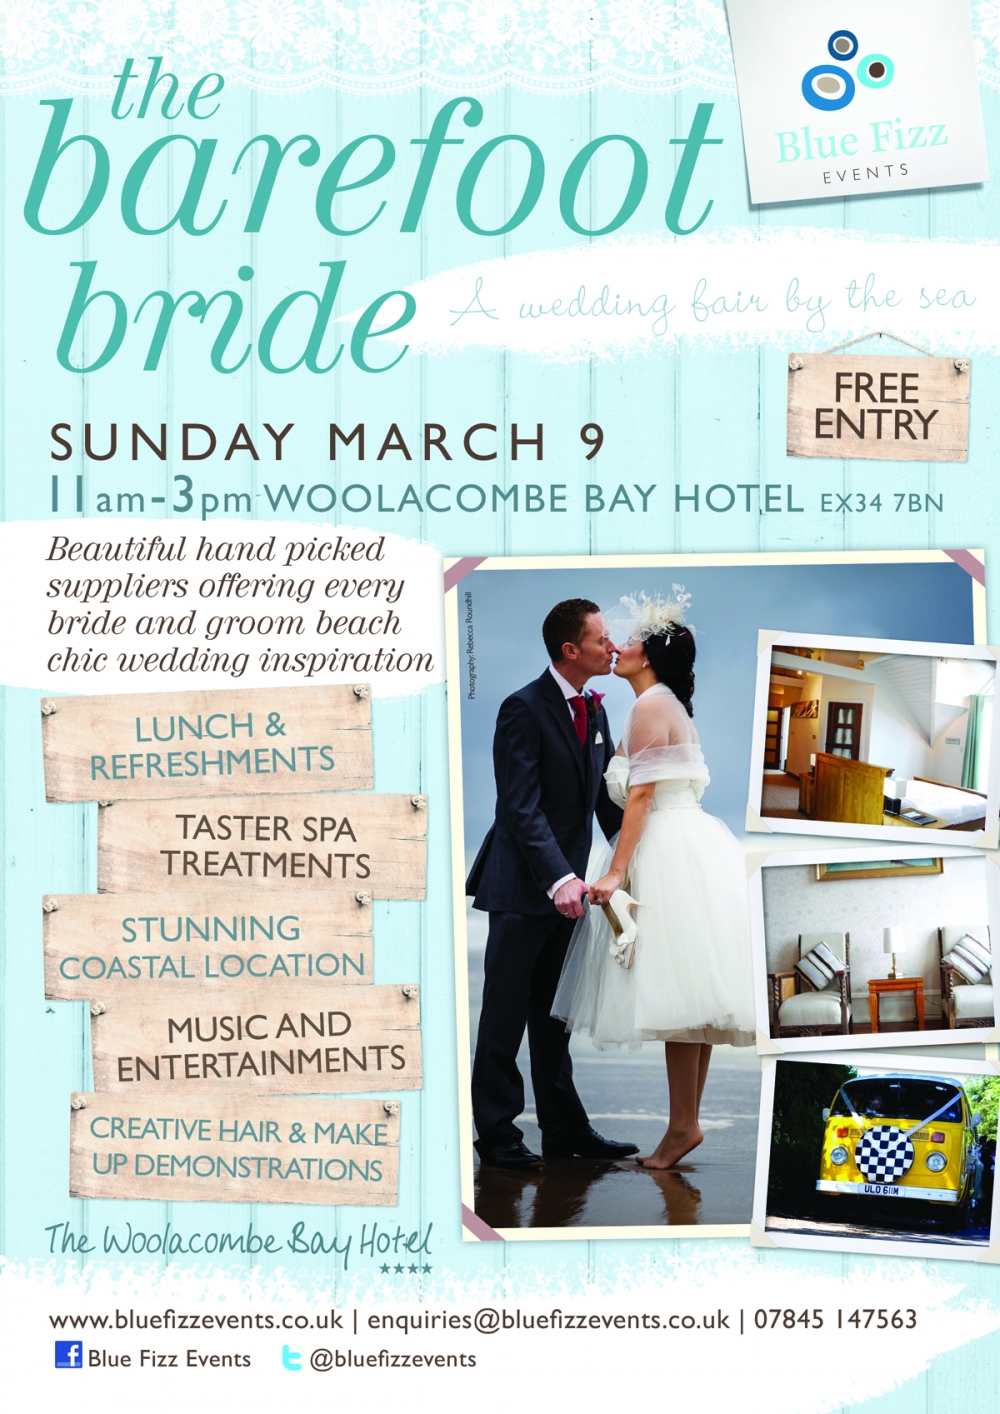 The Barefoot Bride Fair at Woolacombe Bay Hotel